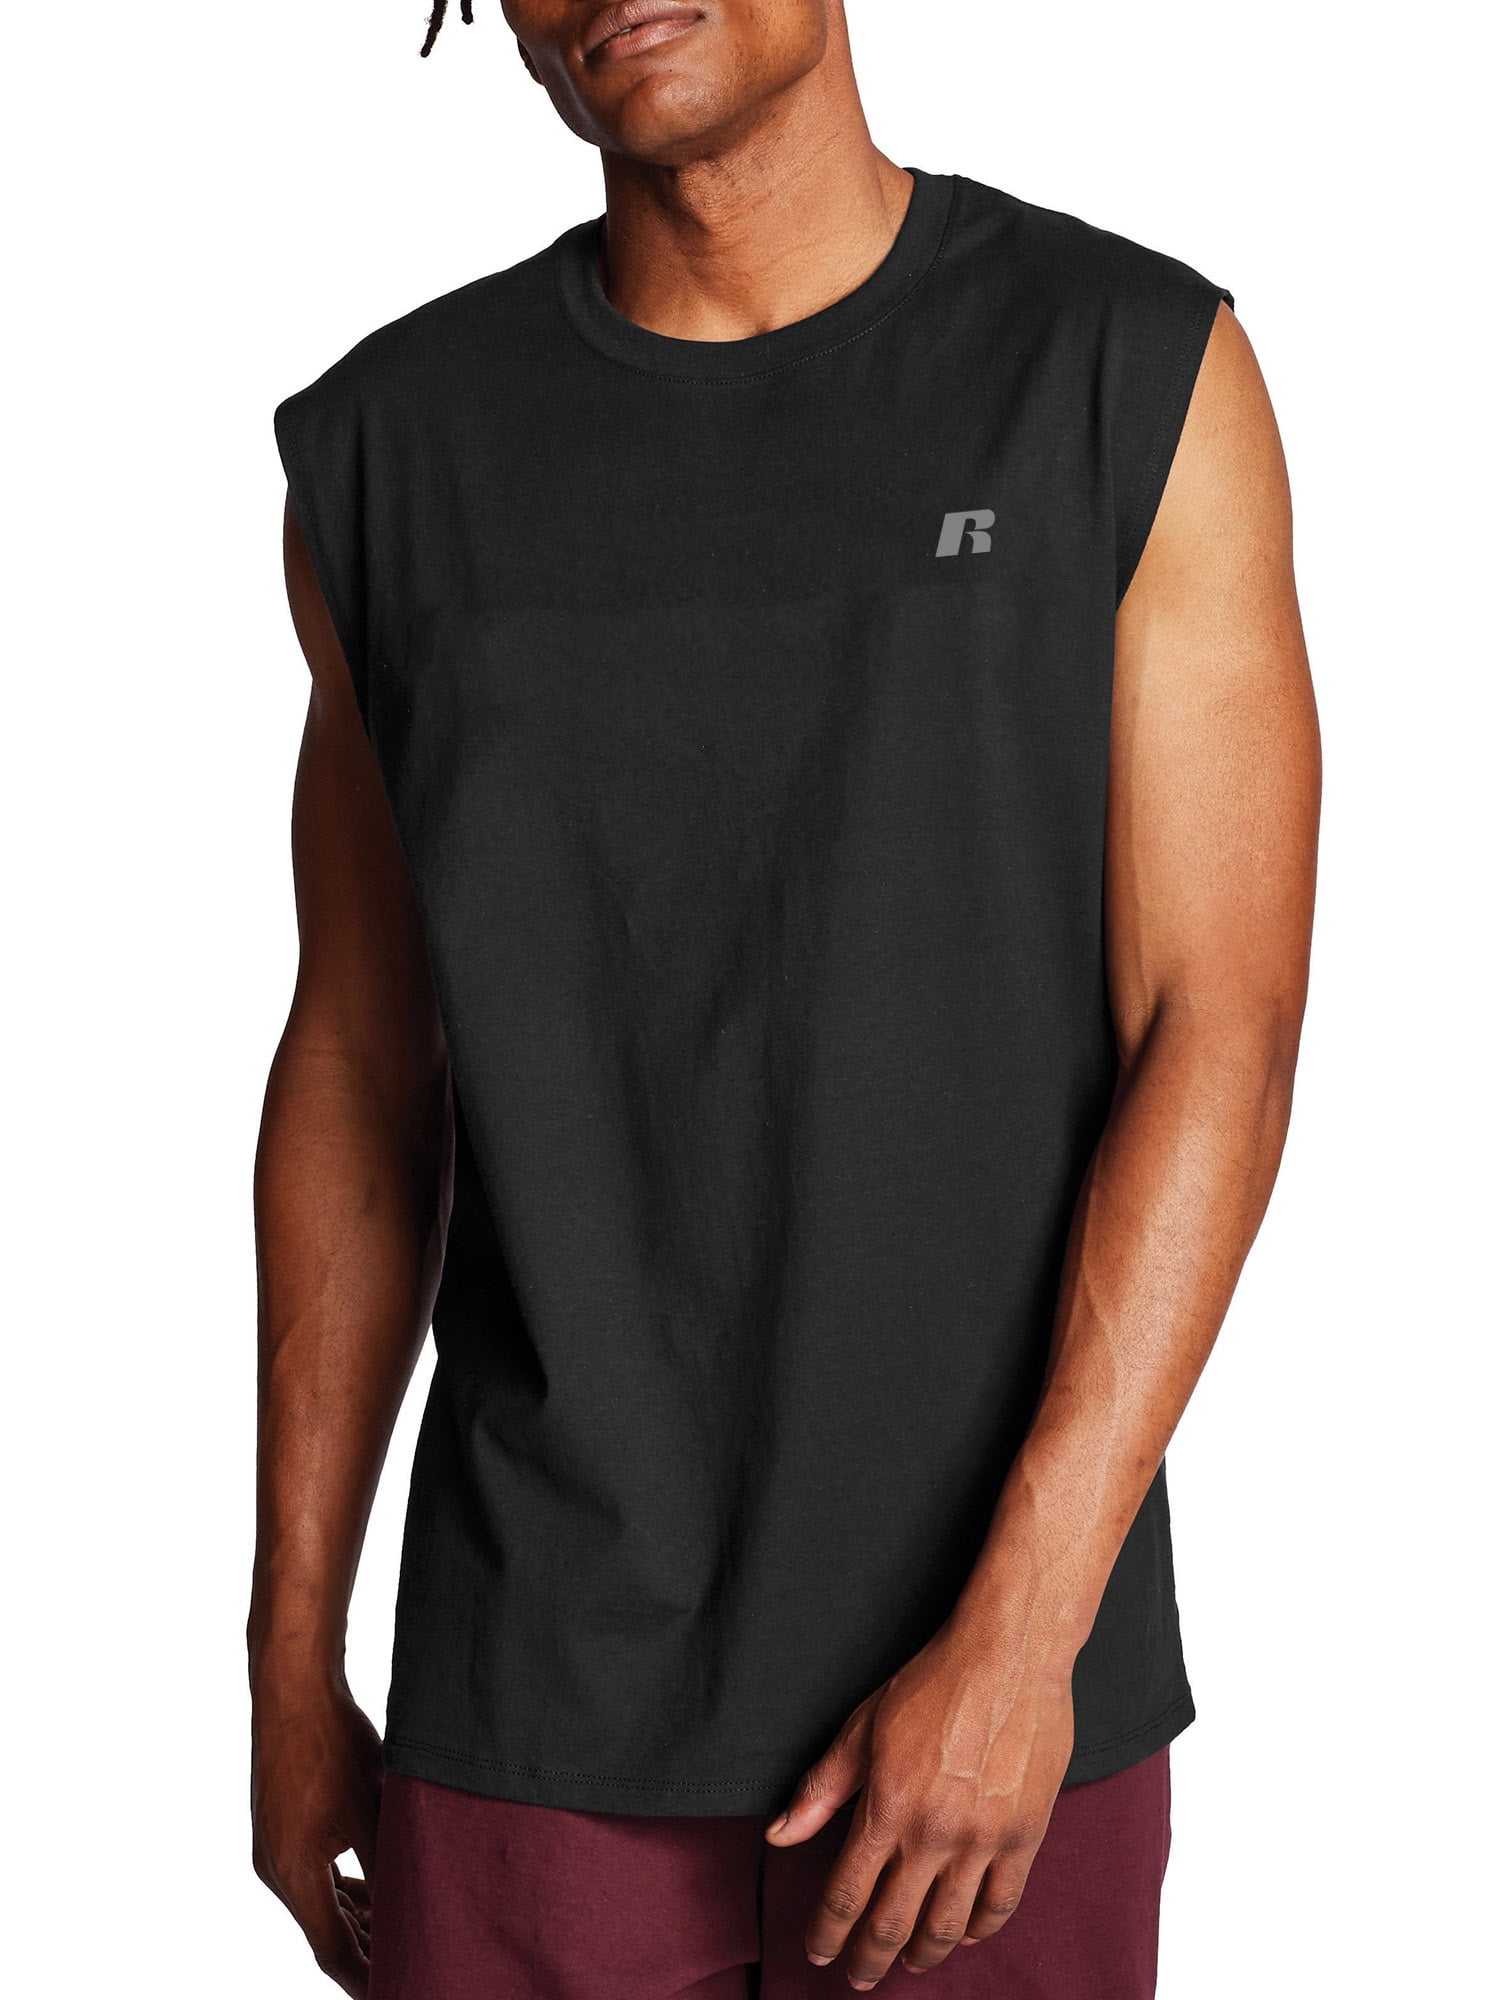 Russell Athletic Men's Big & Tall Dri-Power Muscle Tee shirt, up to ...